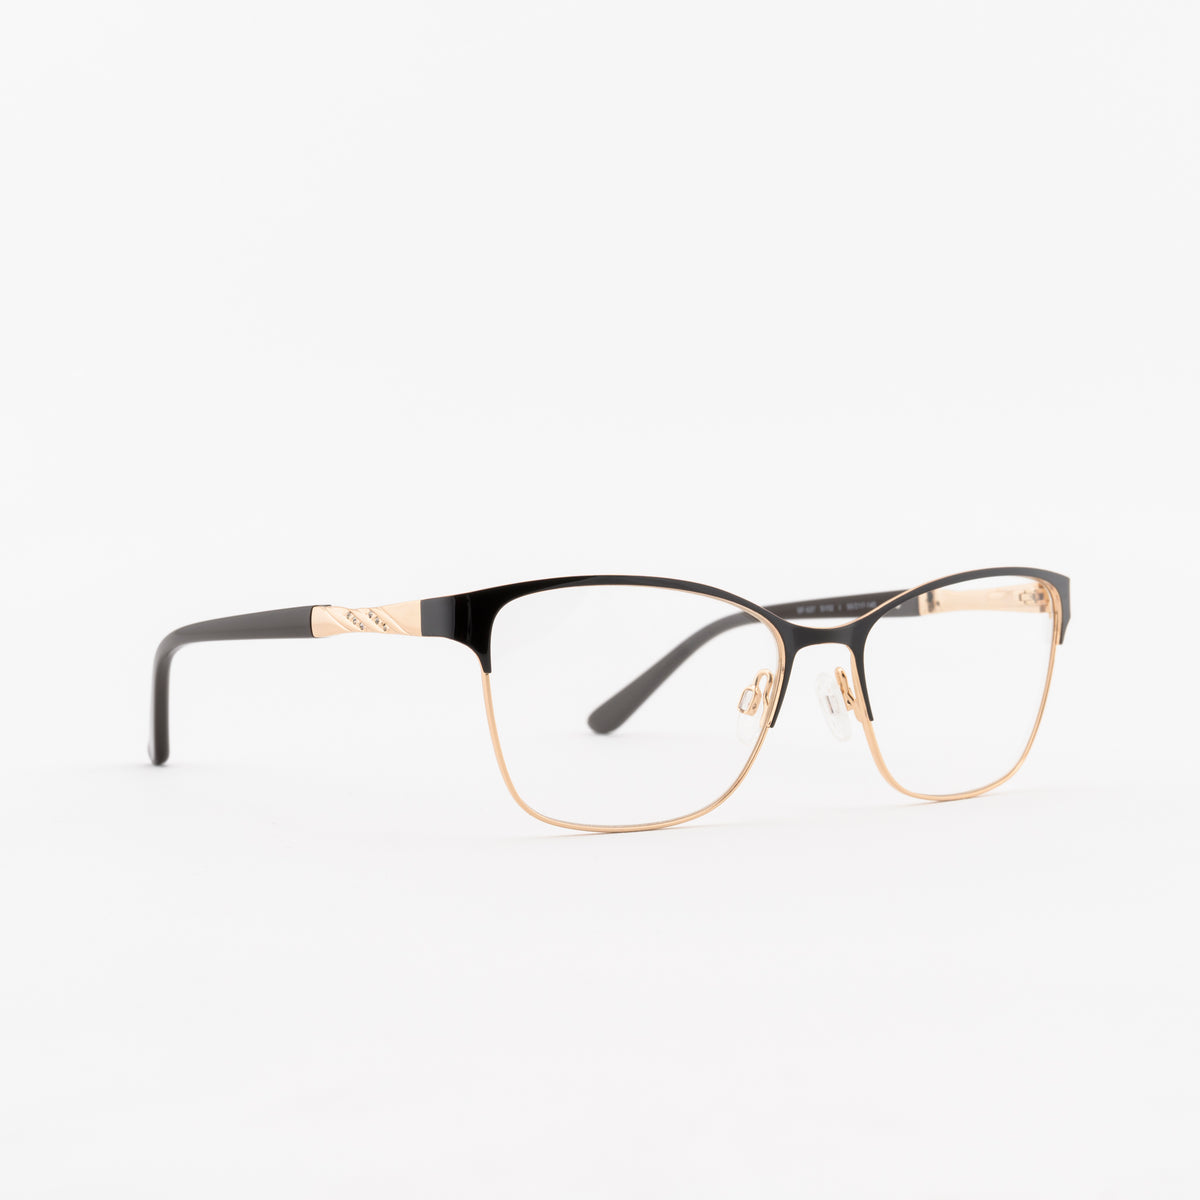 SF-537 Frames Superflex 55 S102 - BROWN GOLD Not Available